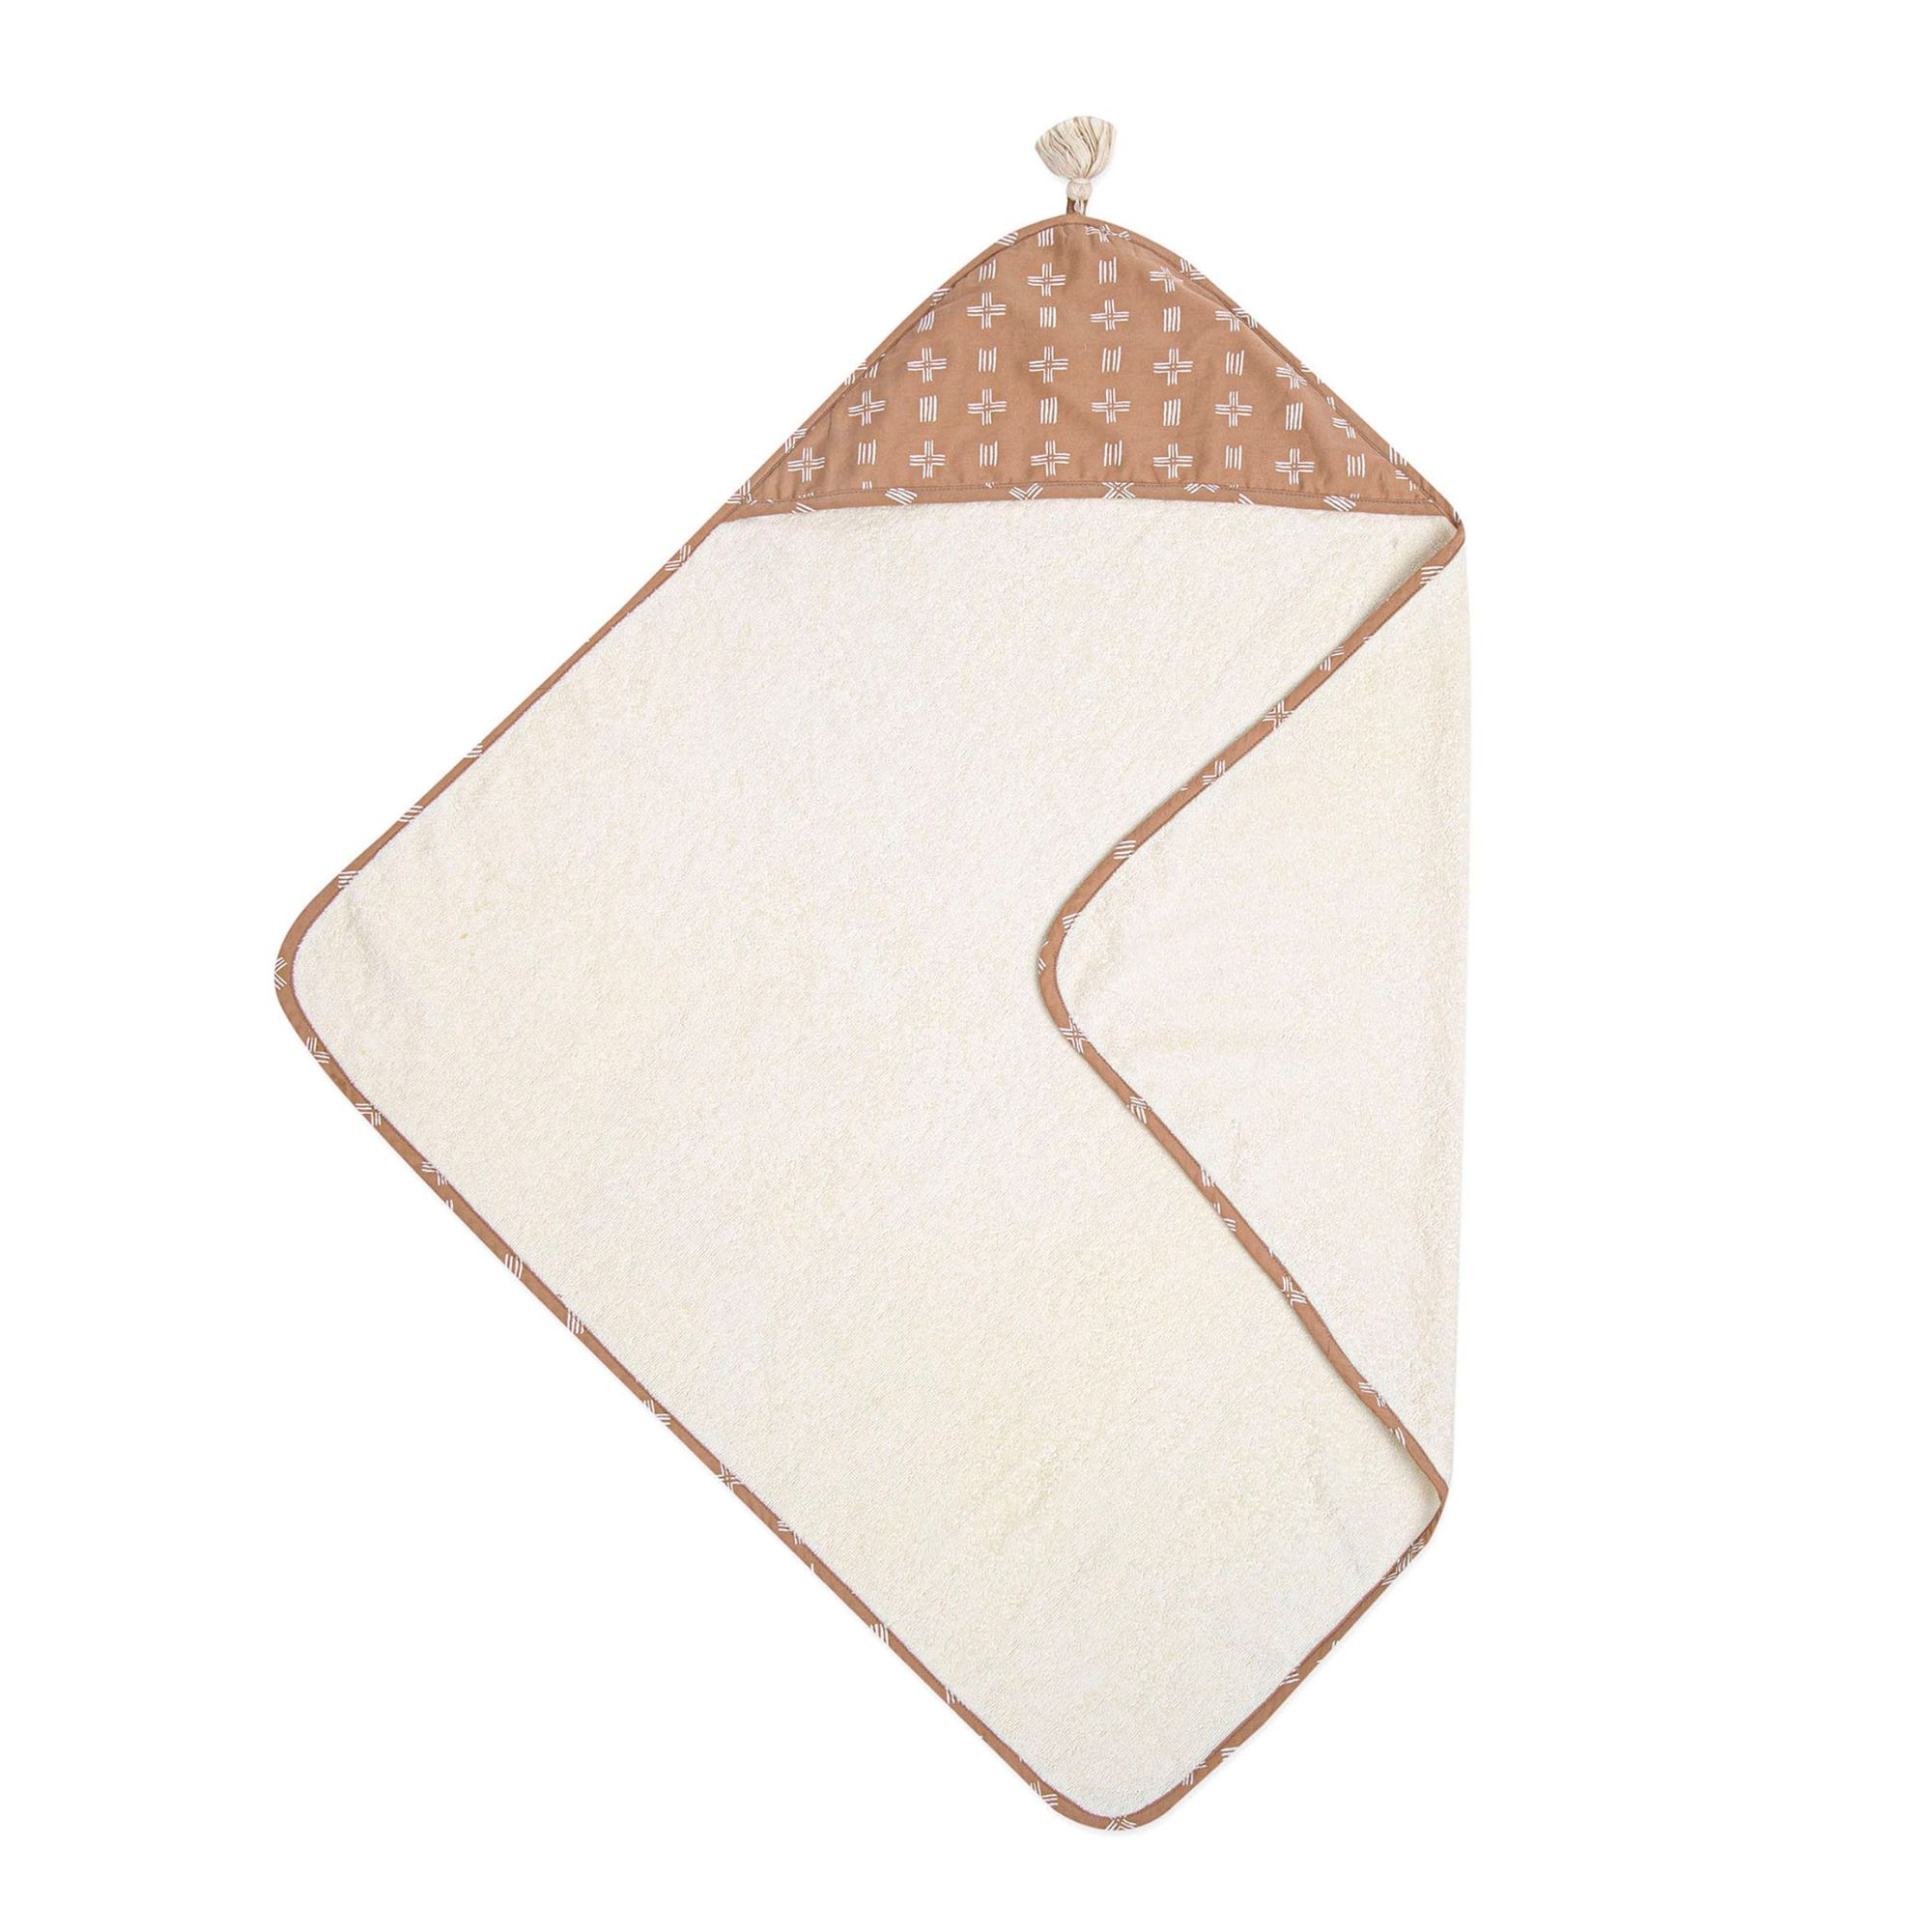 A brown and white hooded towel for a baby